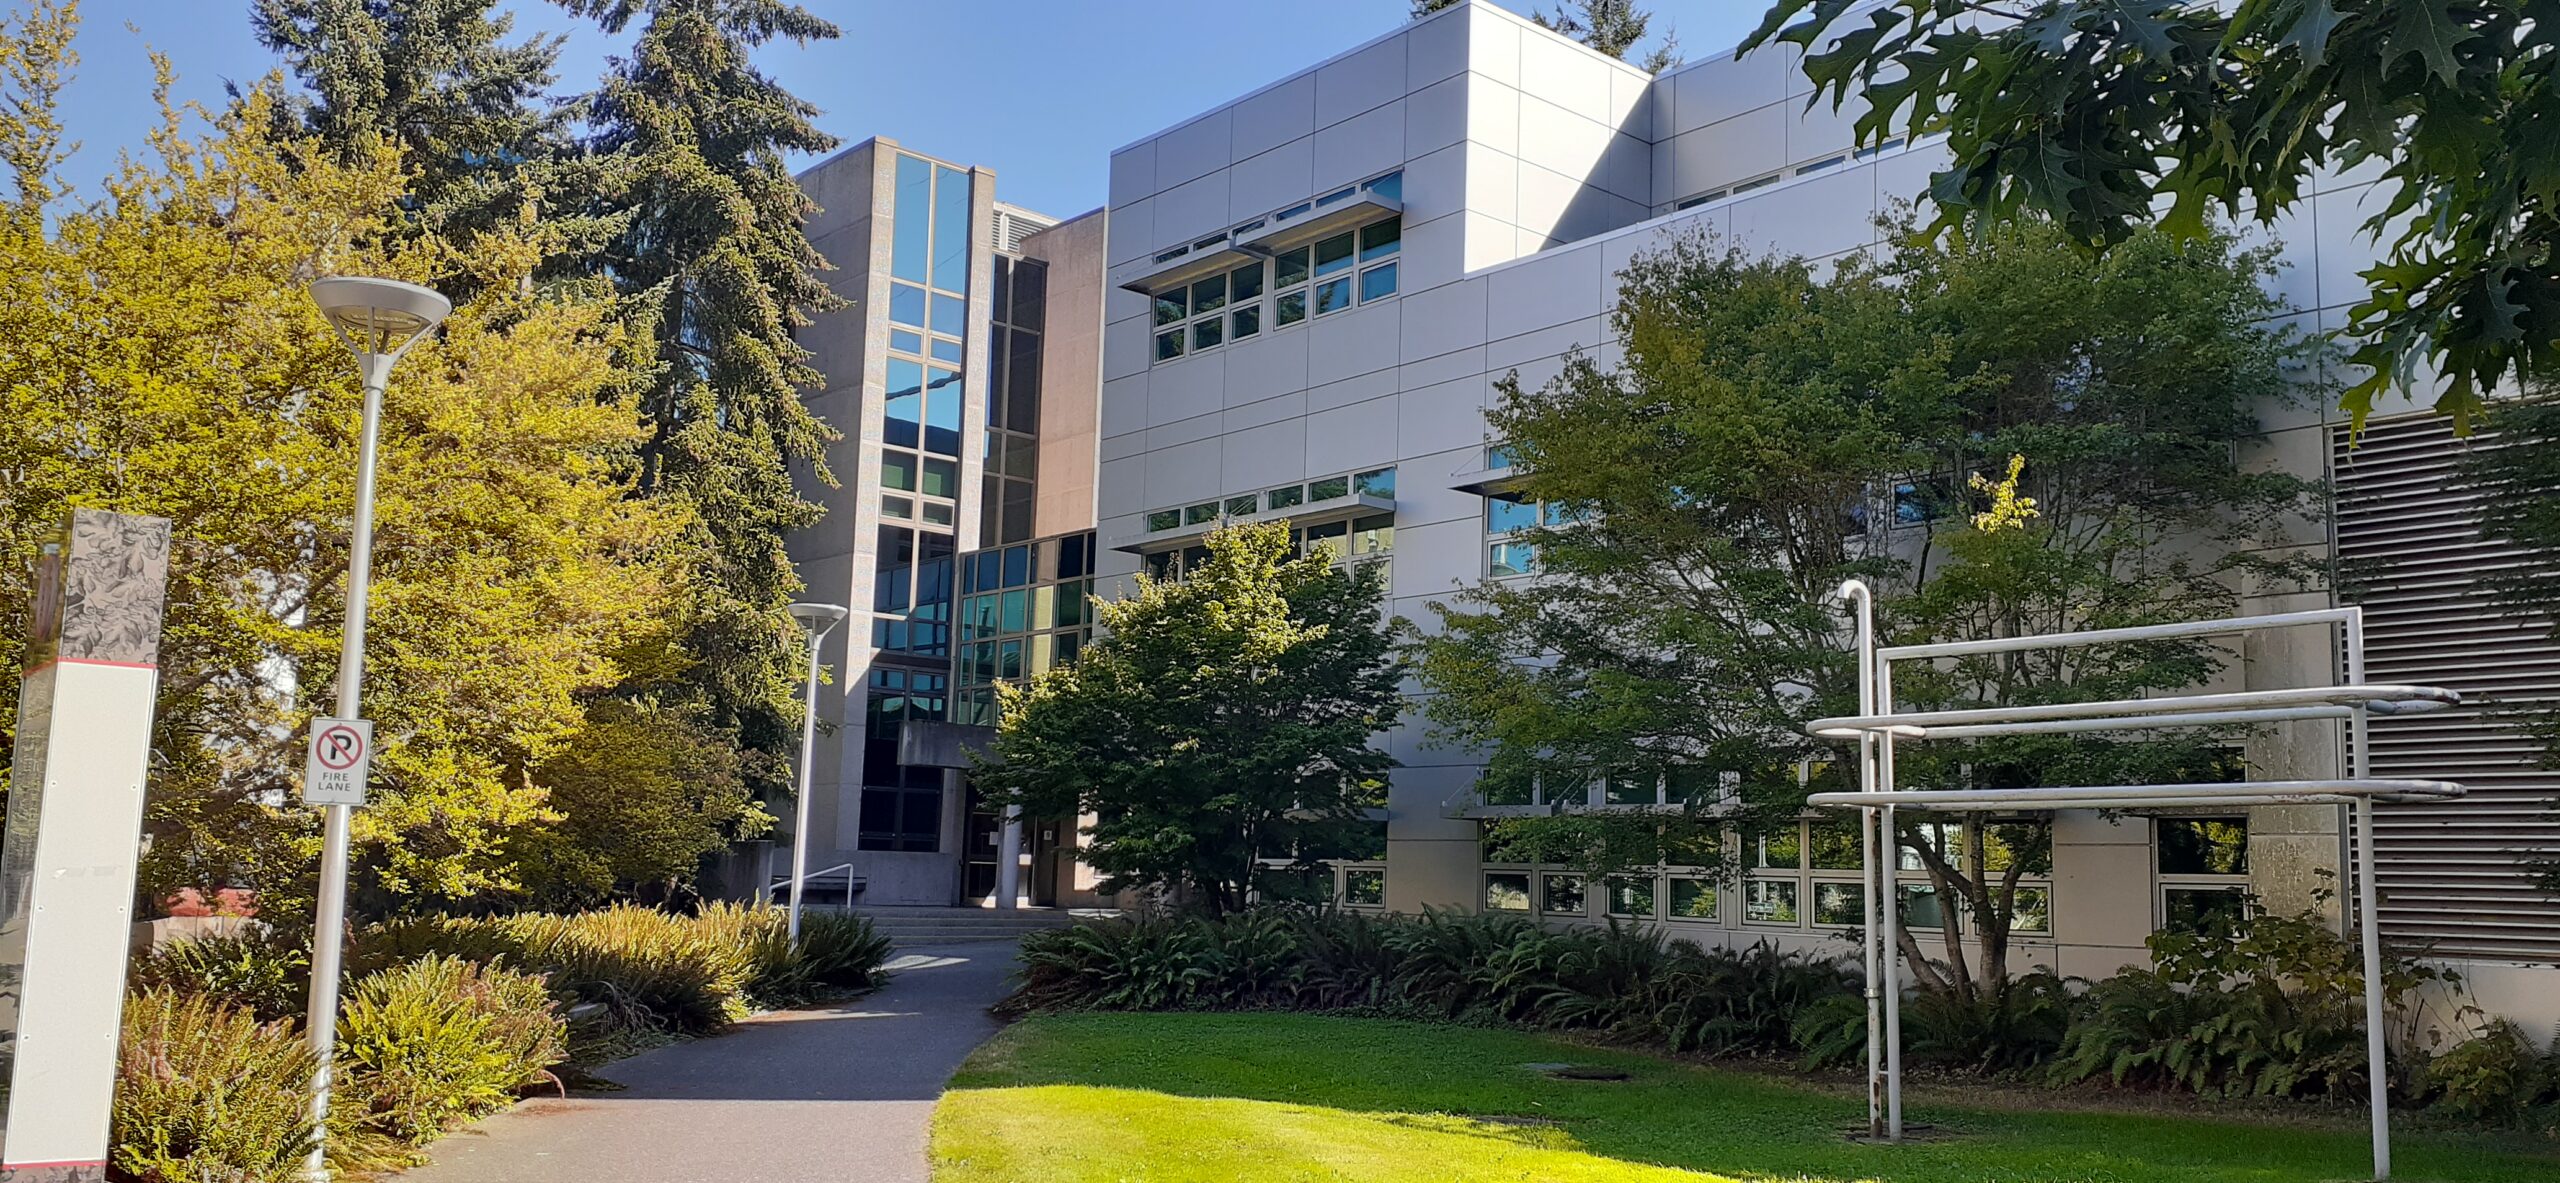 UVic Mechanical Engineering curriculum facilitates a culture of social disconnect